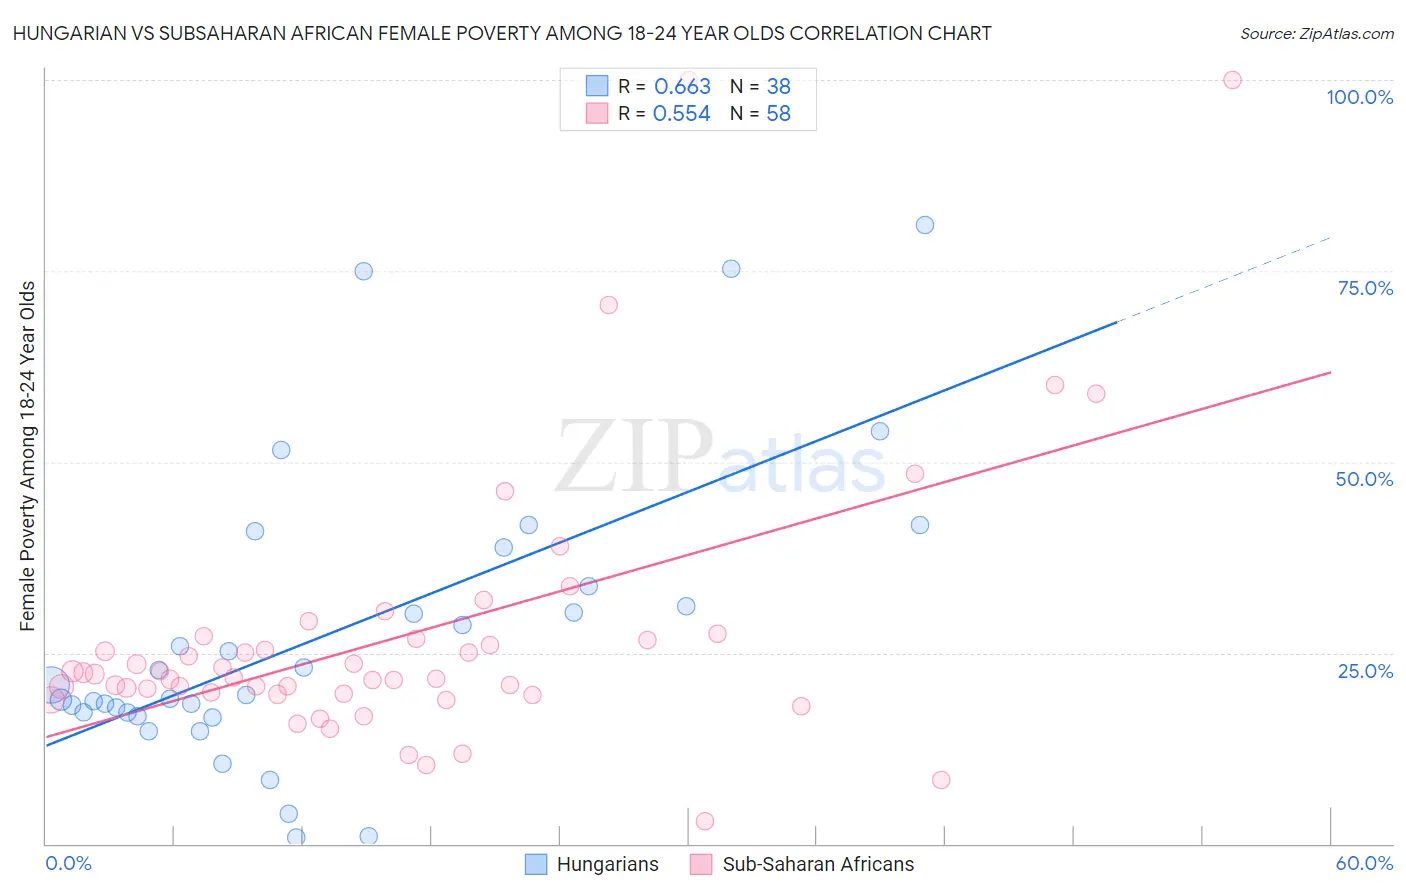 Hungarian vs Subsaharan African Female Poverty Among 18-24 Year Olds